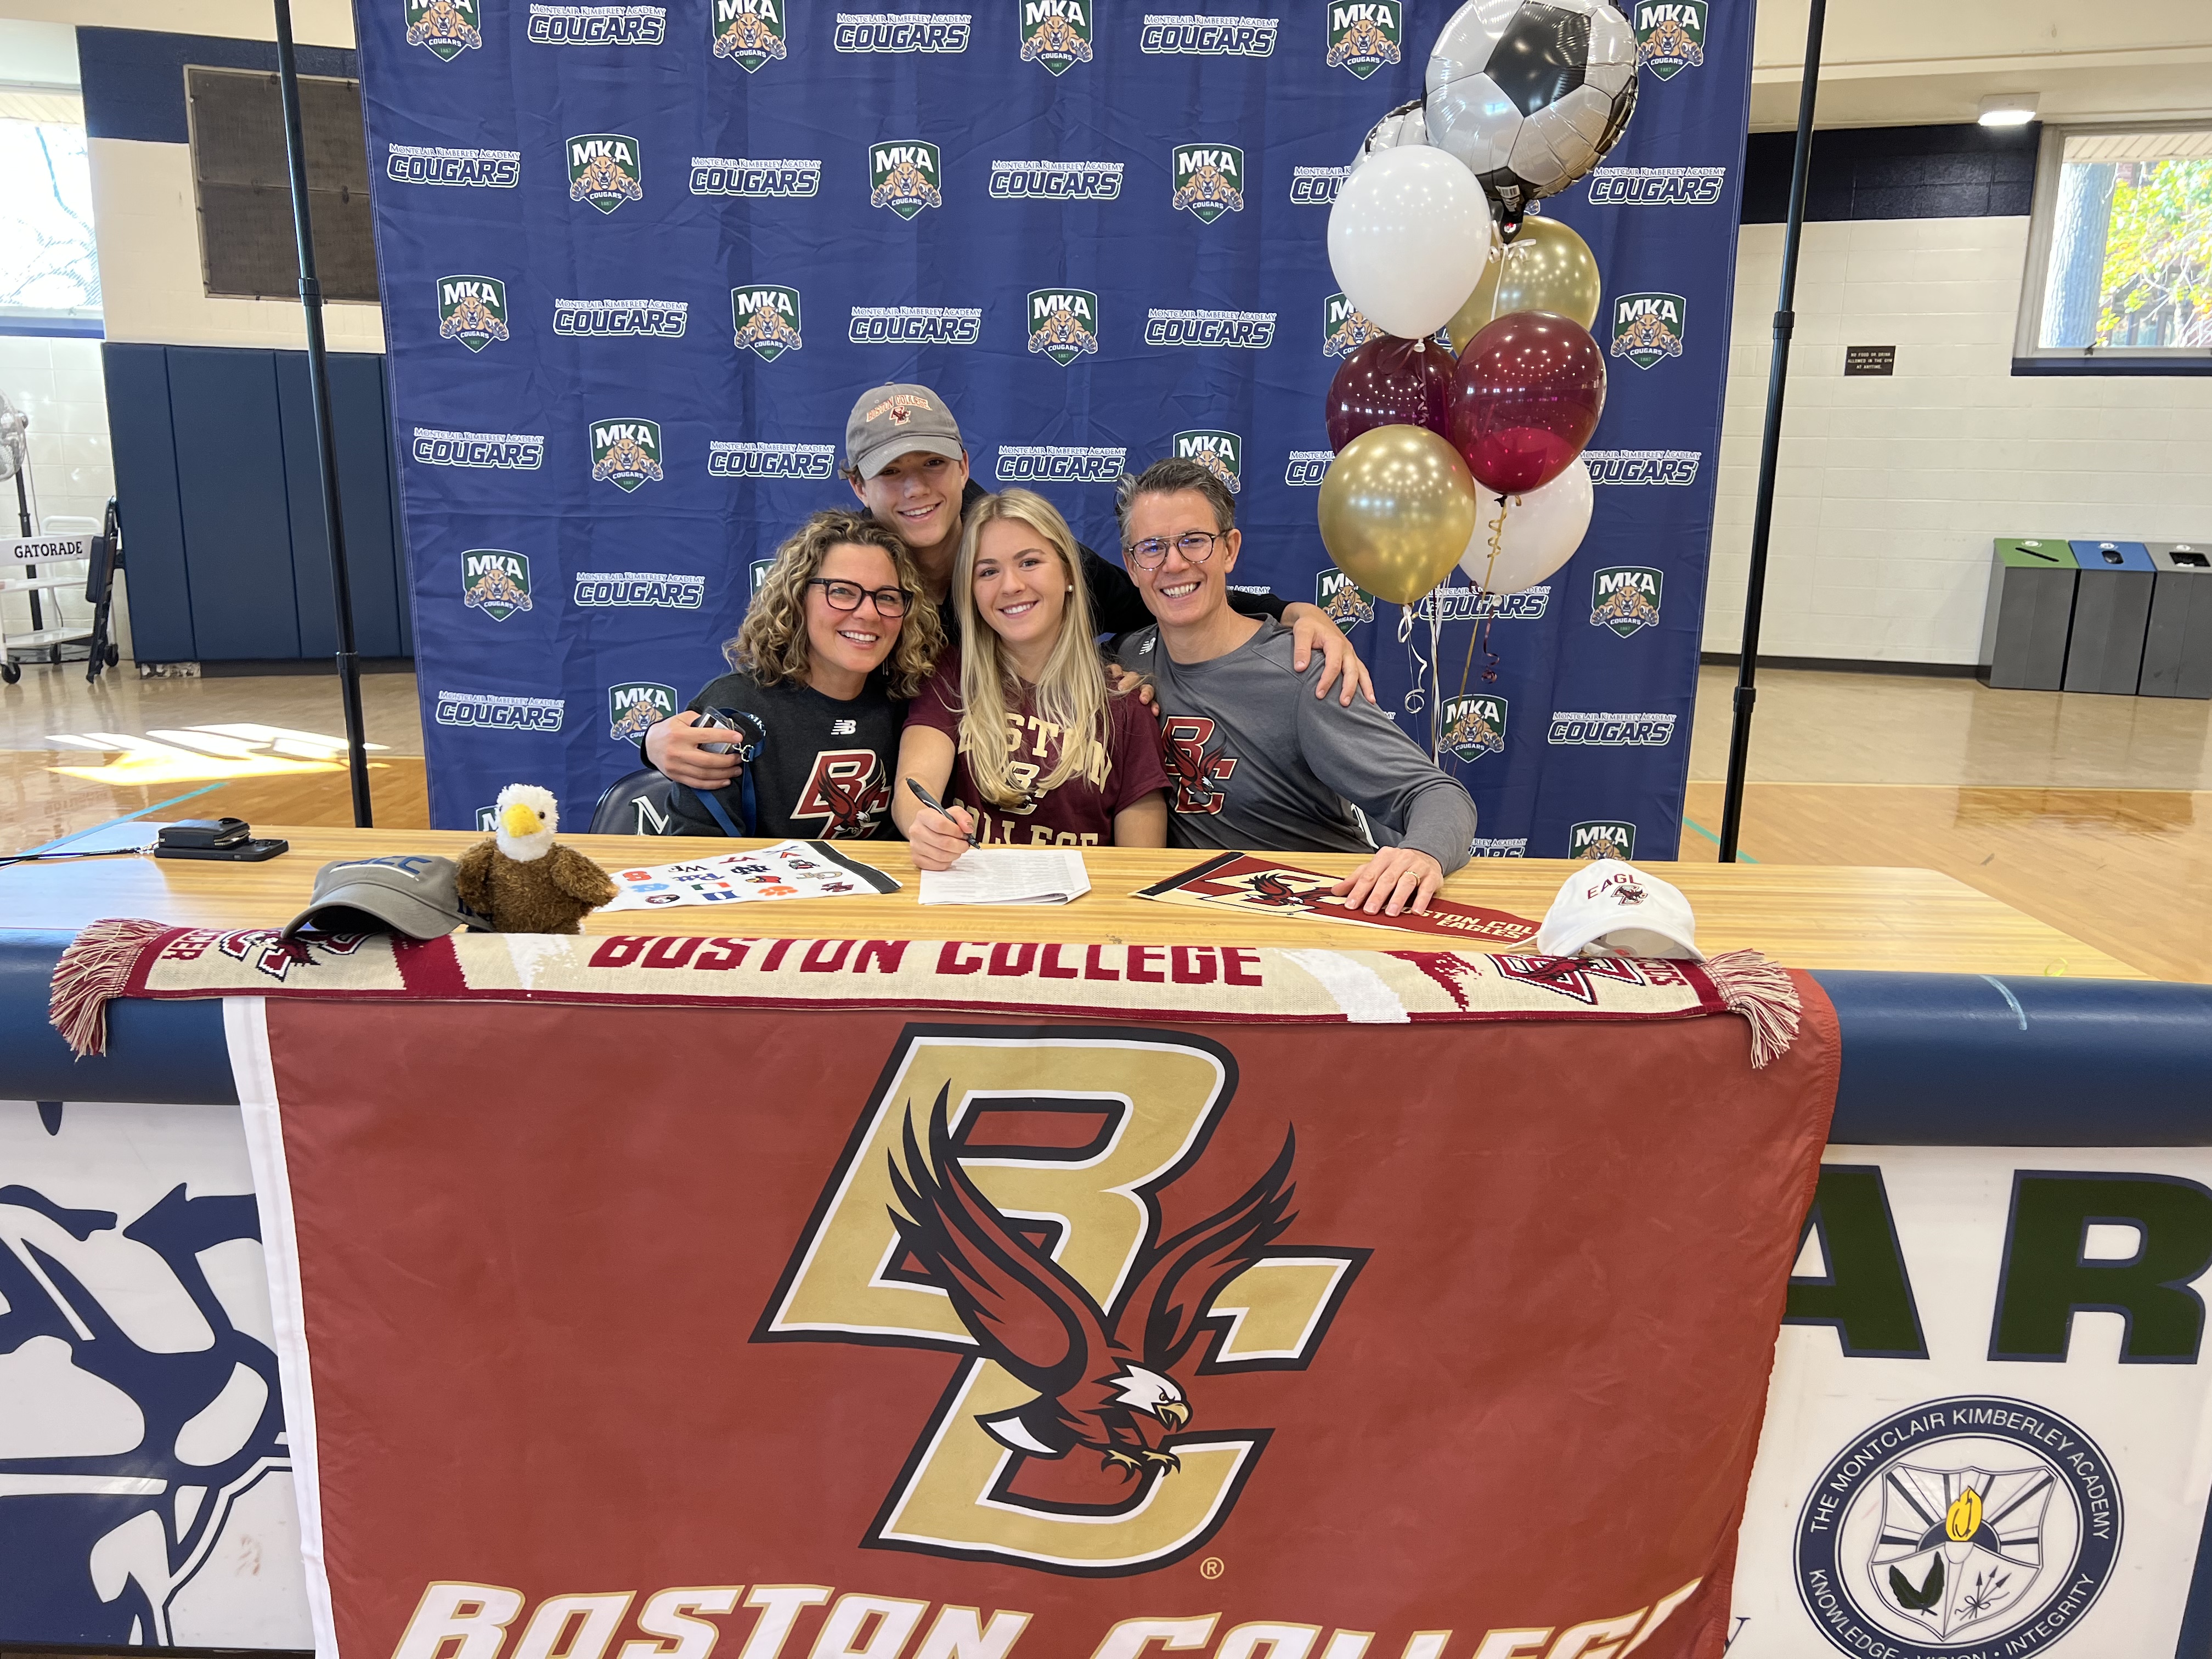 Bella Douglas of Montclair Kimberley signs to play soccer at Boston College. She is joined at the table with her mom, dad, and younger brother.